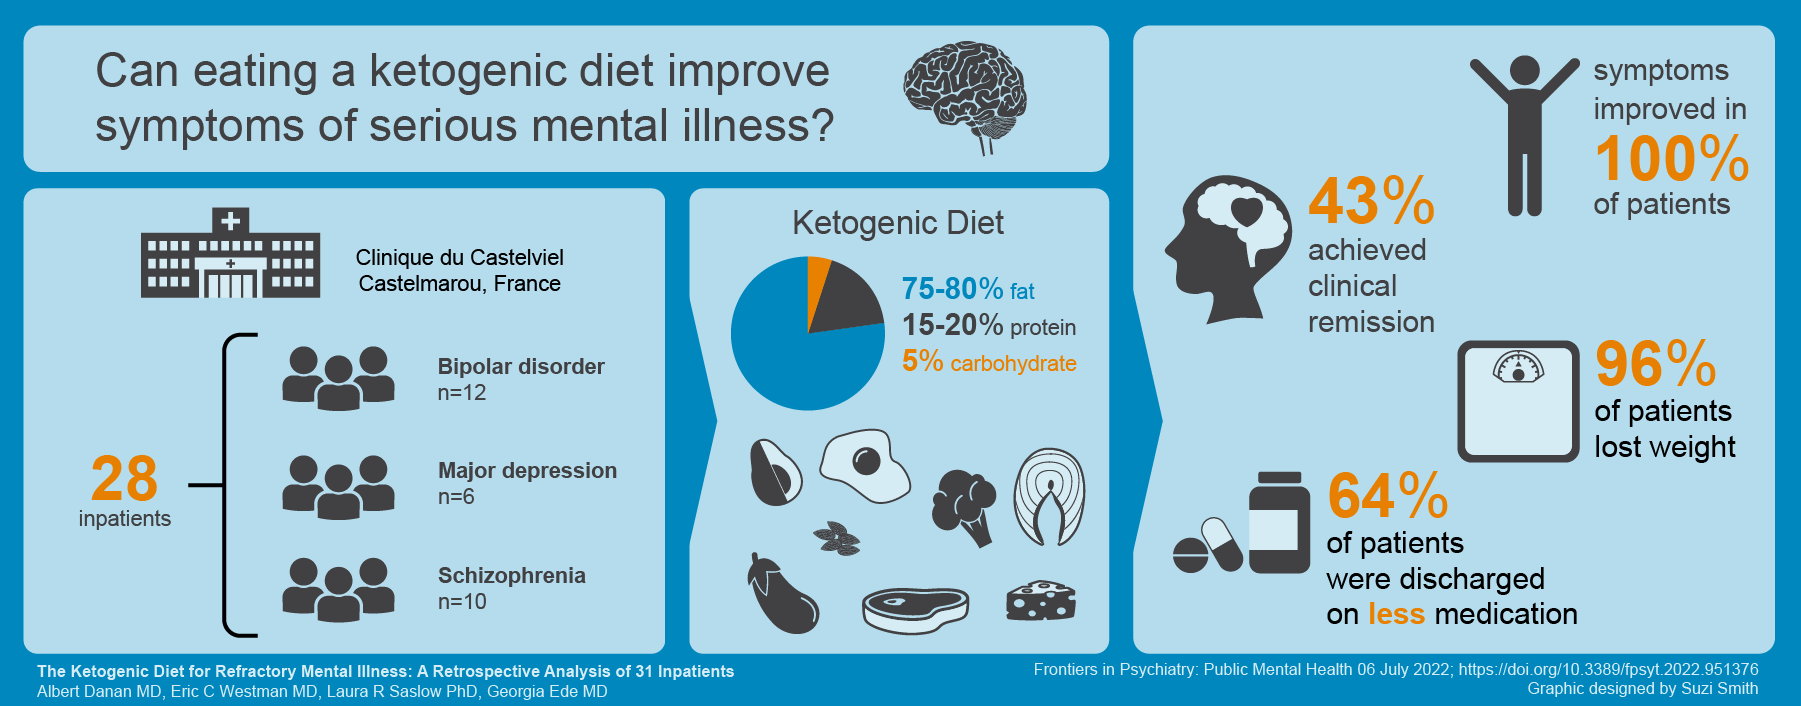 Study Finds Serious Mental Illnesses Improve on Ketogenic Diet